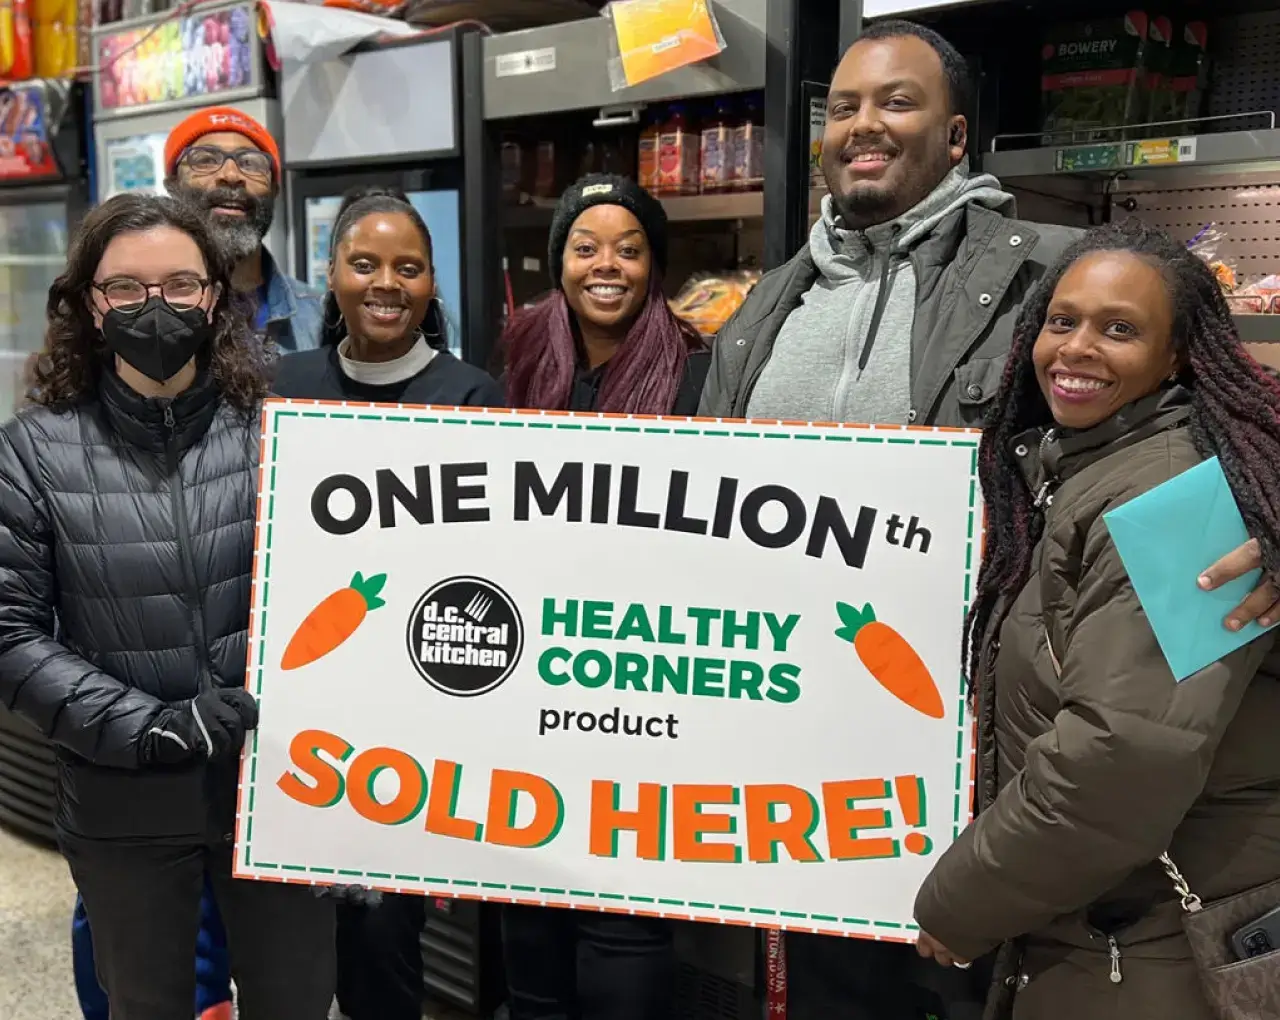 On January 16, 2023, at the Elmira Market located on South Capitol Street, DC Central Kitchen celebrated the distribution of one million units of fresh food through its Healthy Corners program, in collaboration with one of its partner stores.